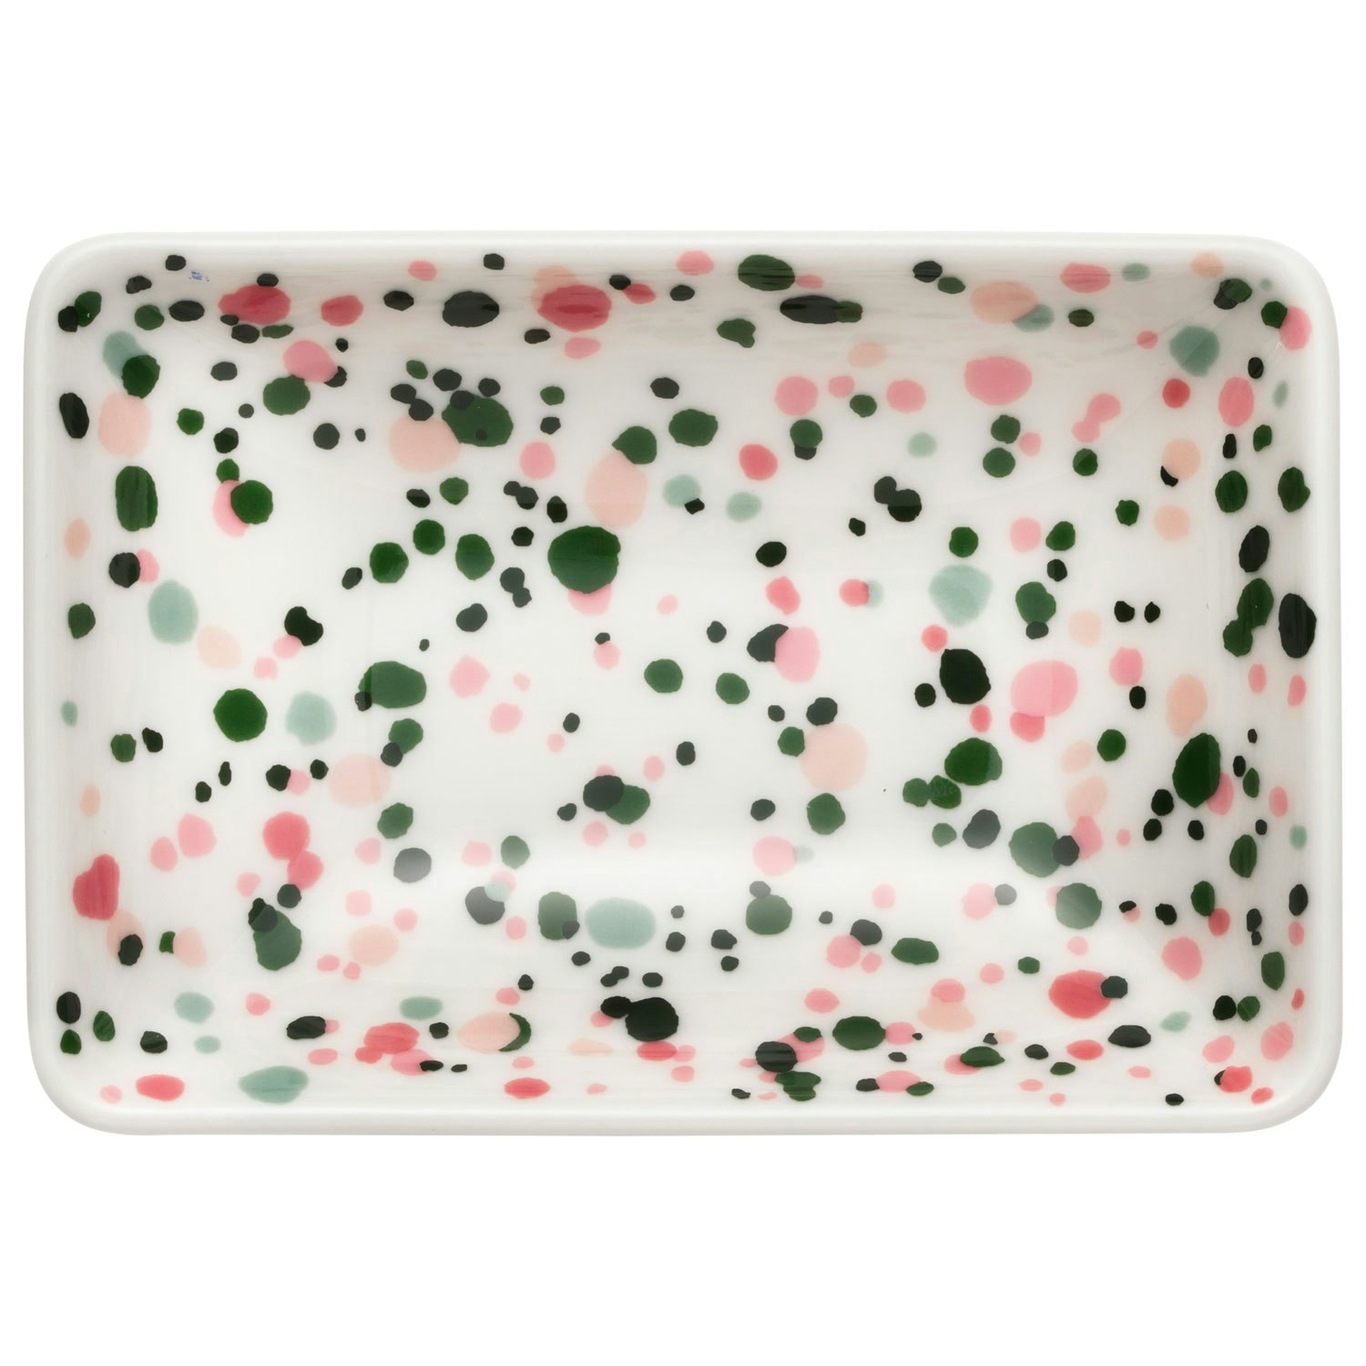 Oiva Toikka Collection Helle Plate Pink / Green, A7 7x10 cm